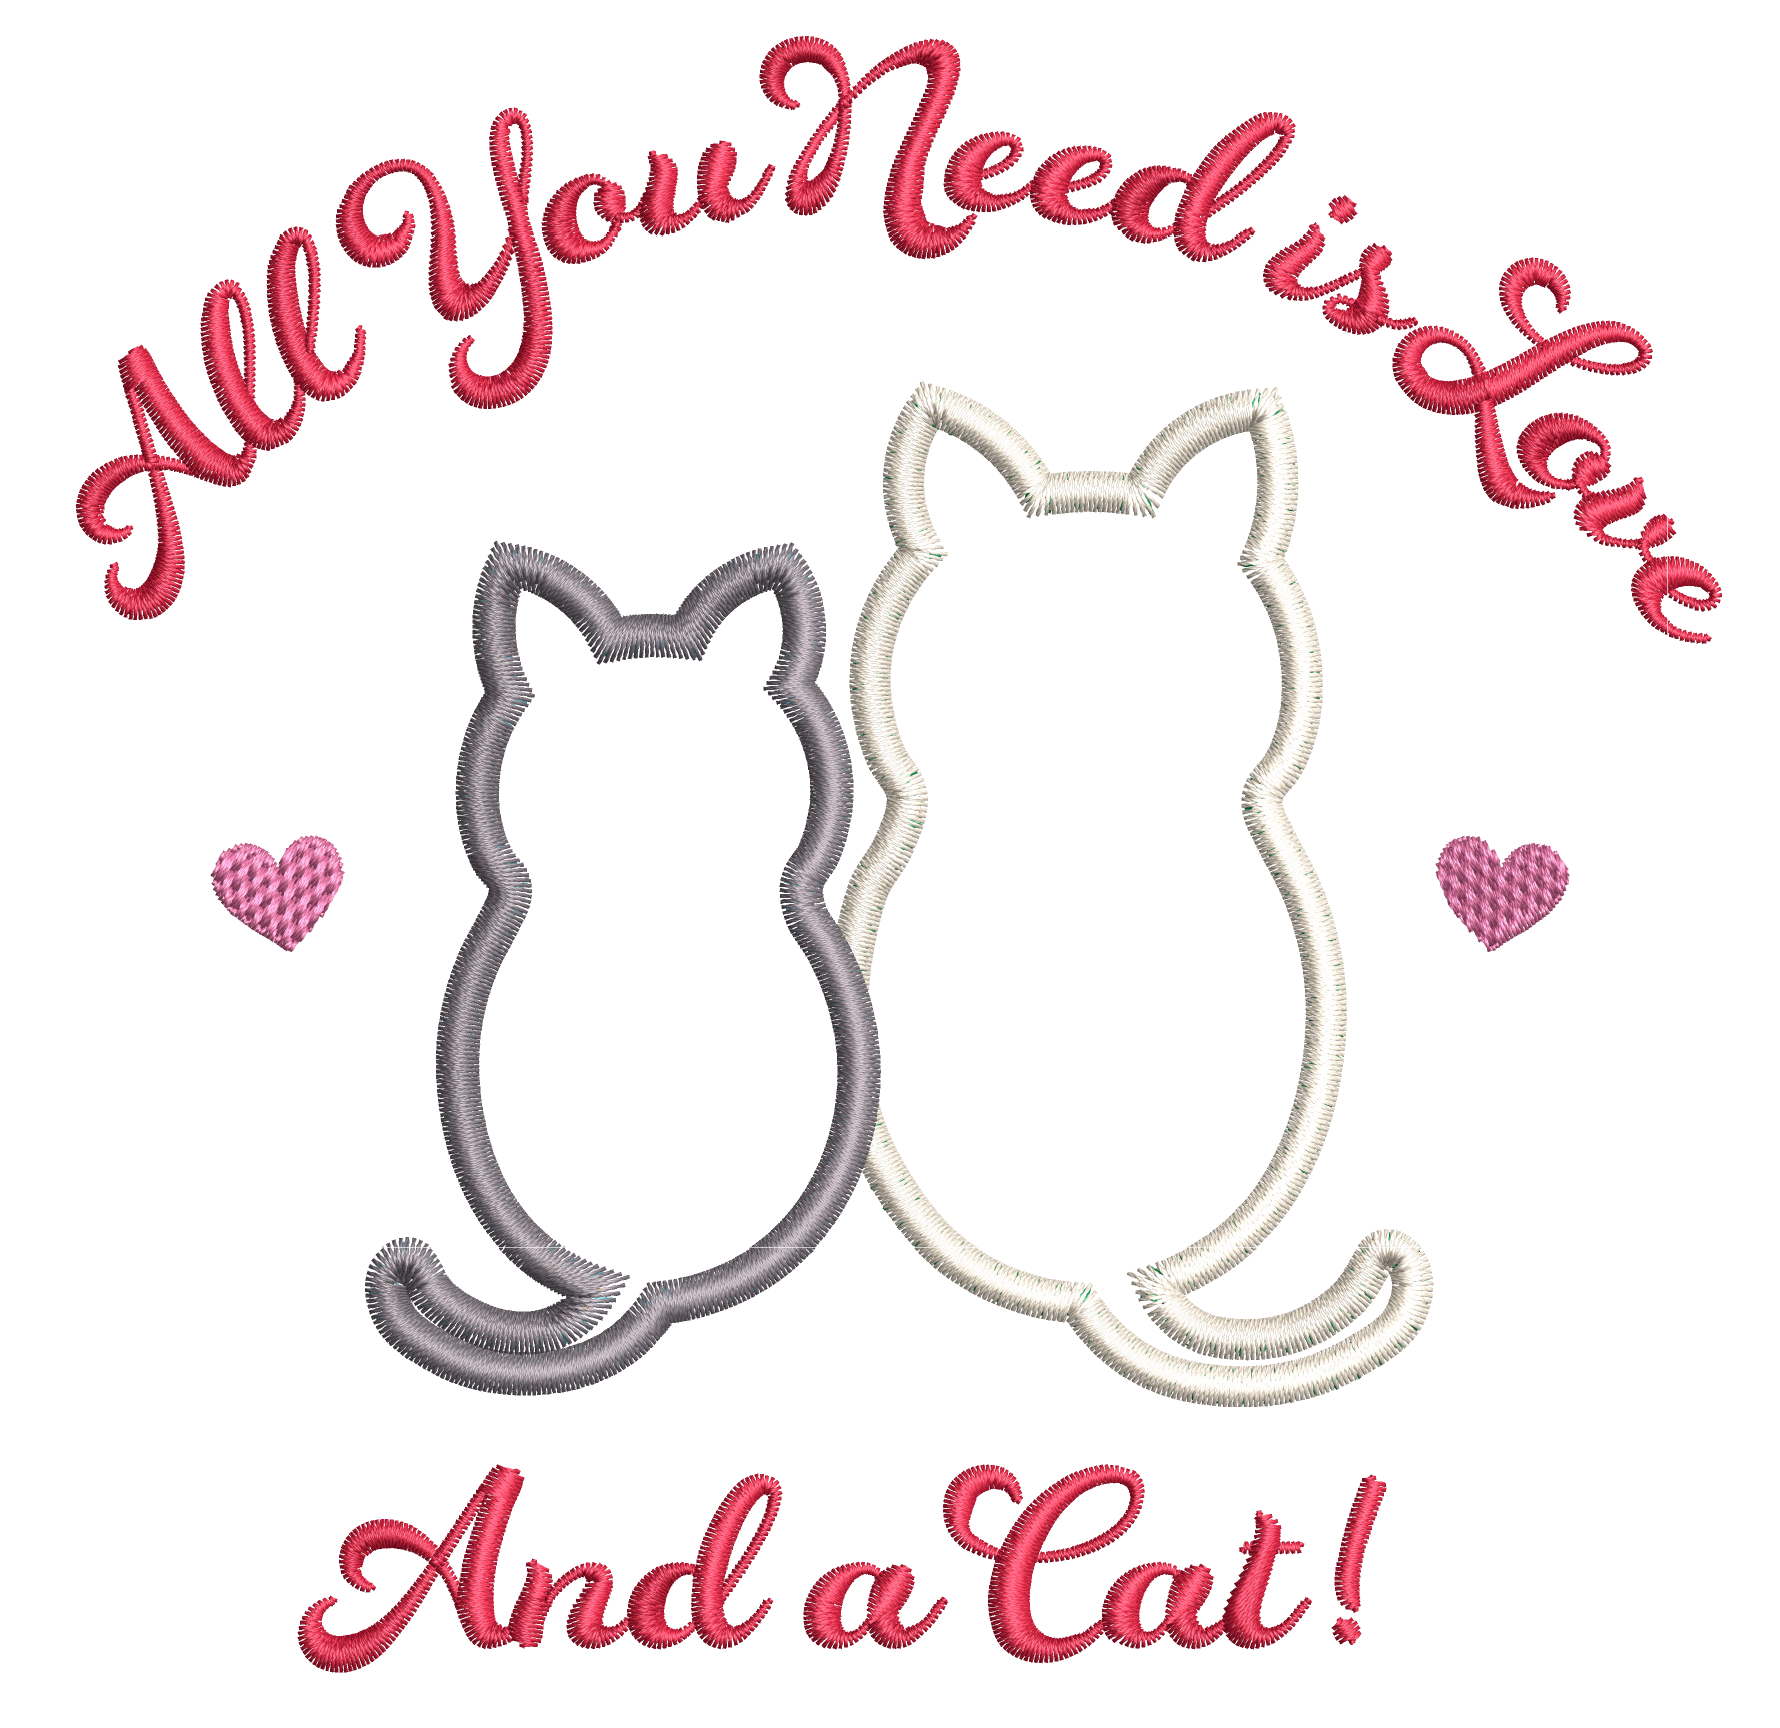 All You Need is Love (and a Cat) Applique